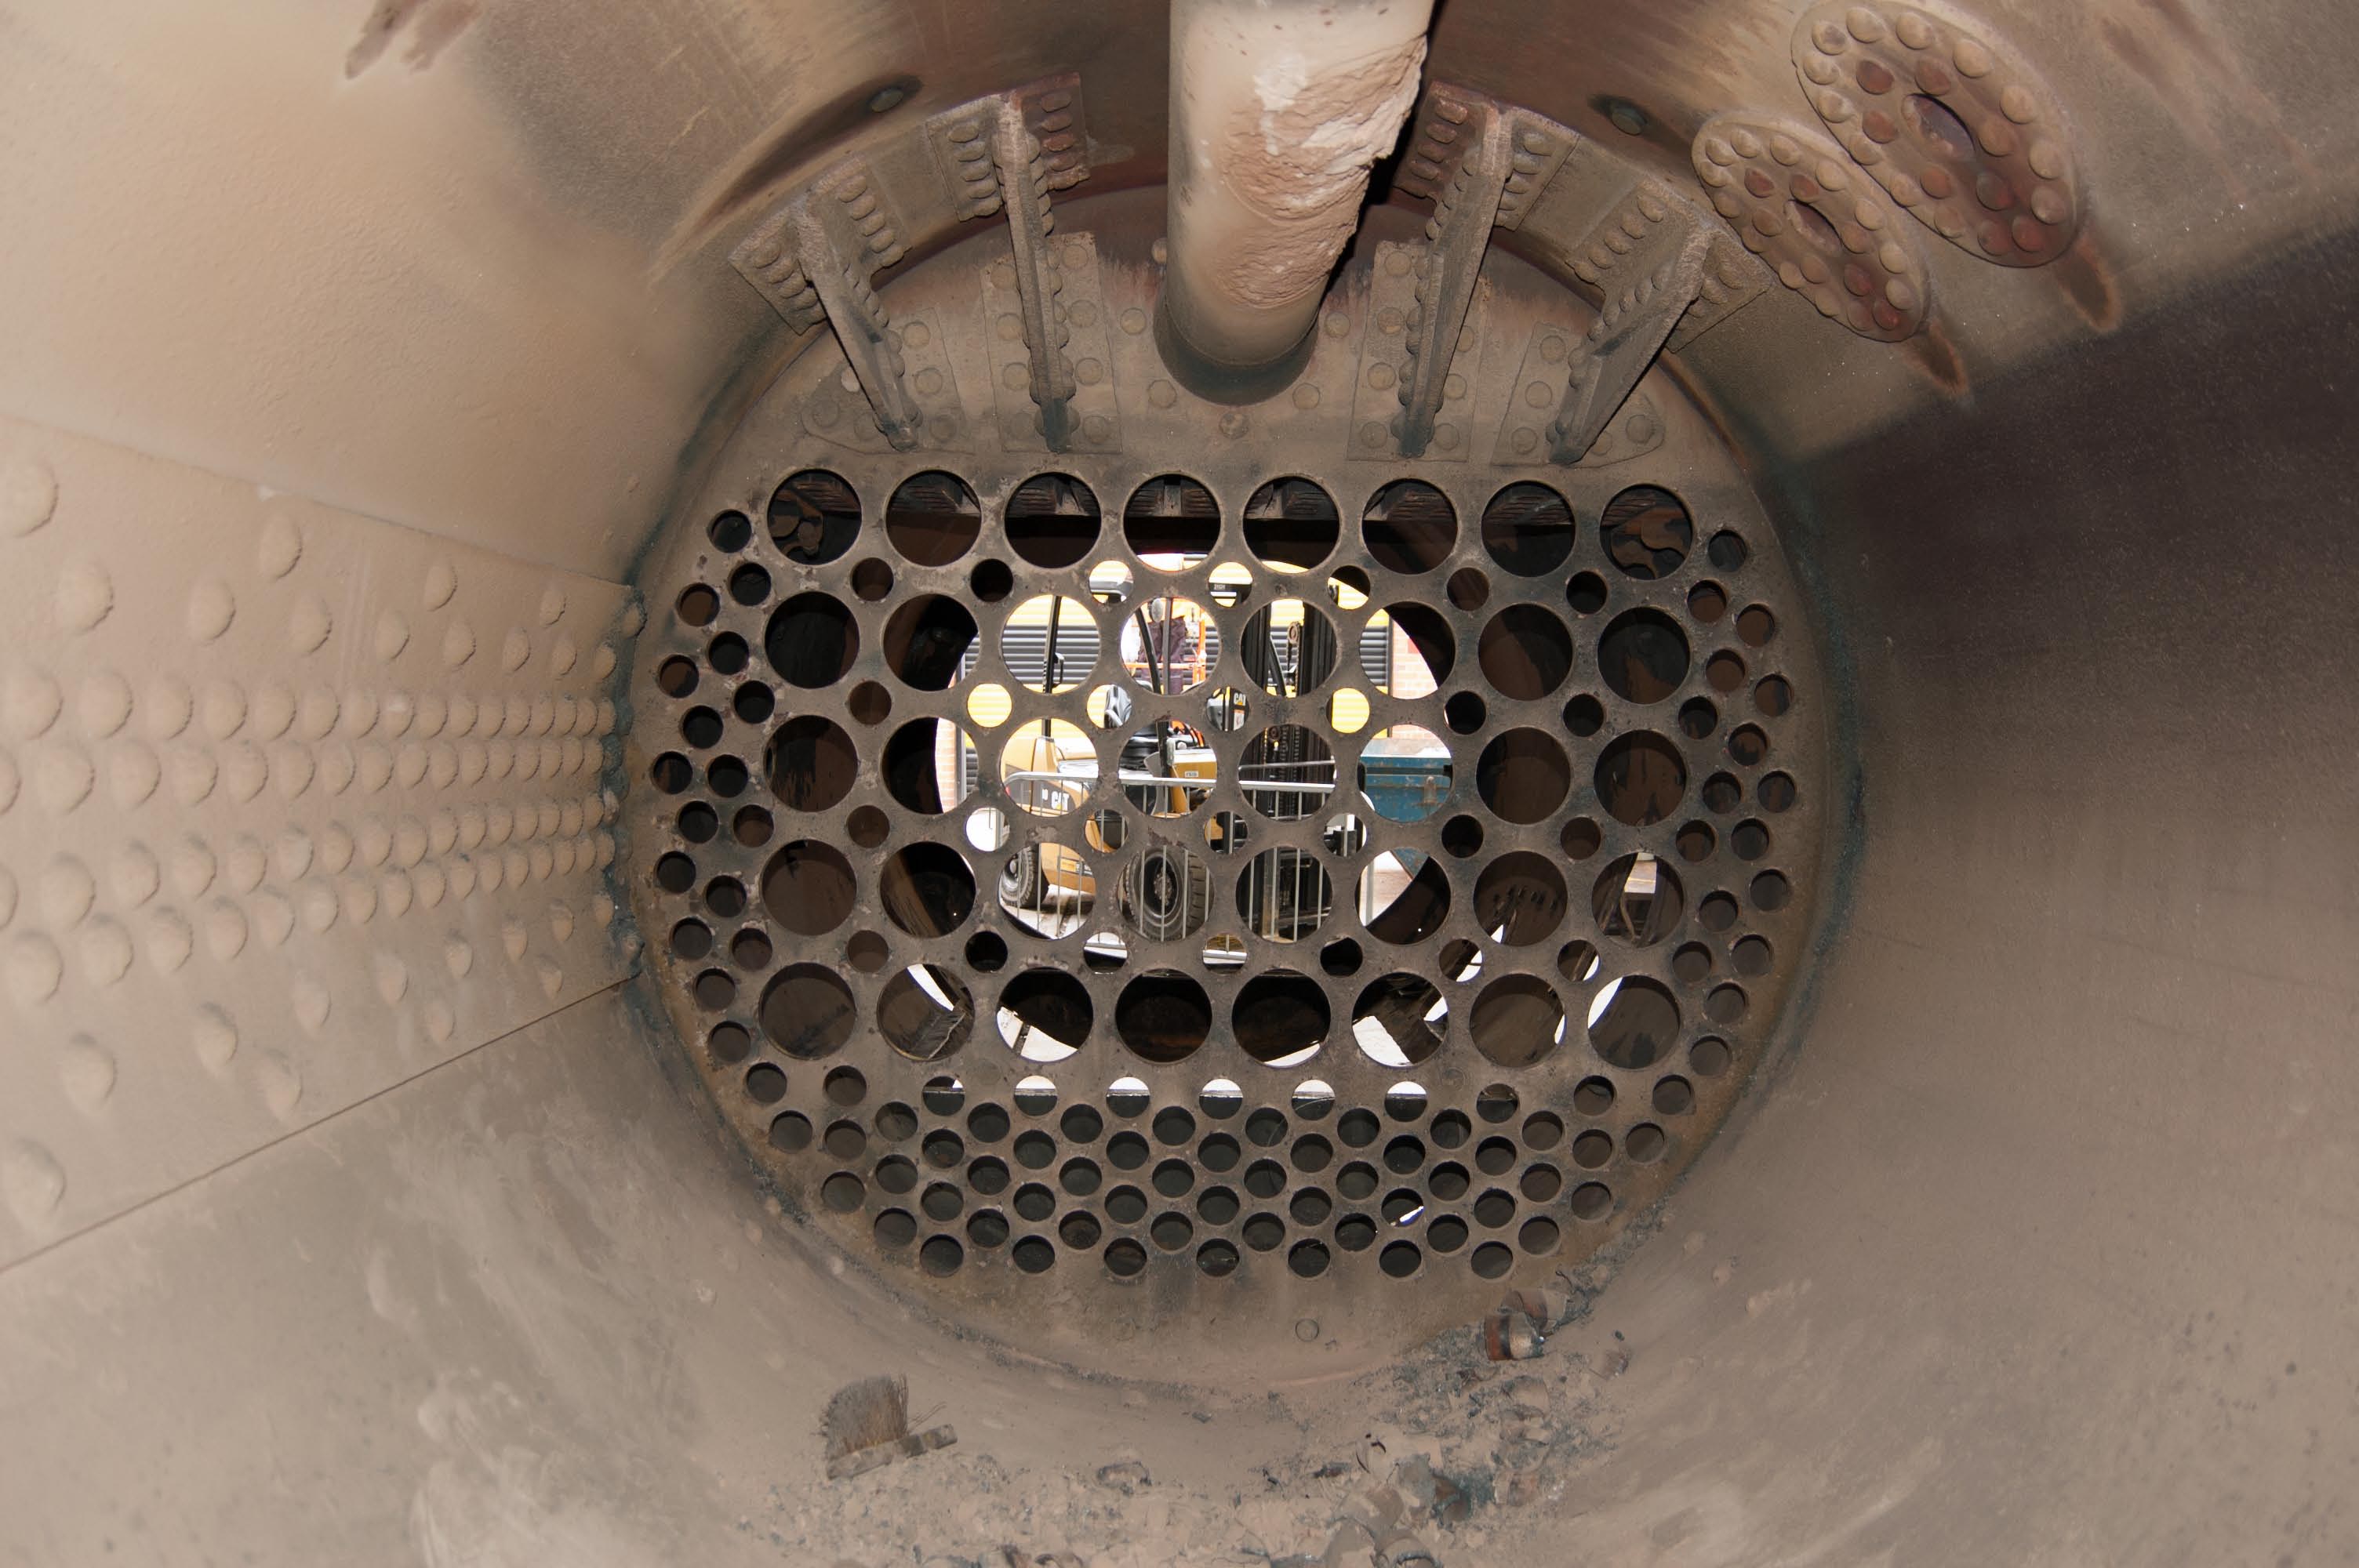 The front tubeplate, seen from inside the boiler barrel. The main steampipe is at the top, and the clacks are on the right. You can see the normal water level from the tide mark.